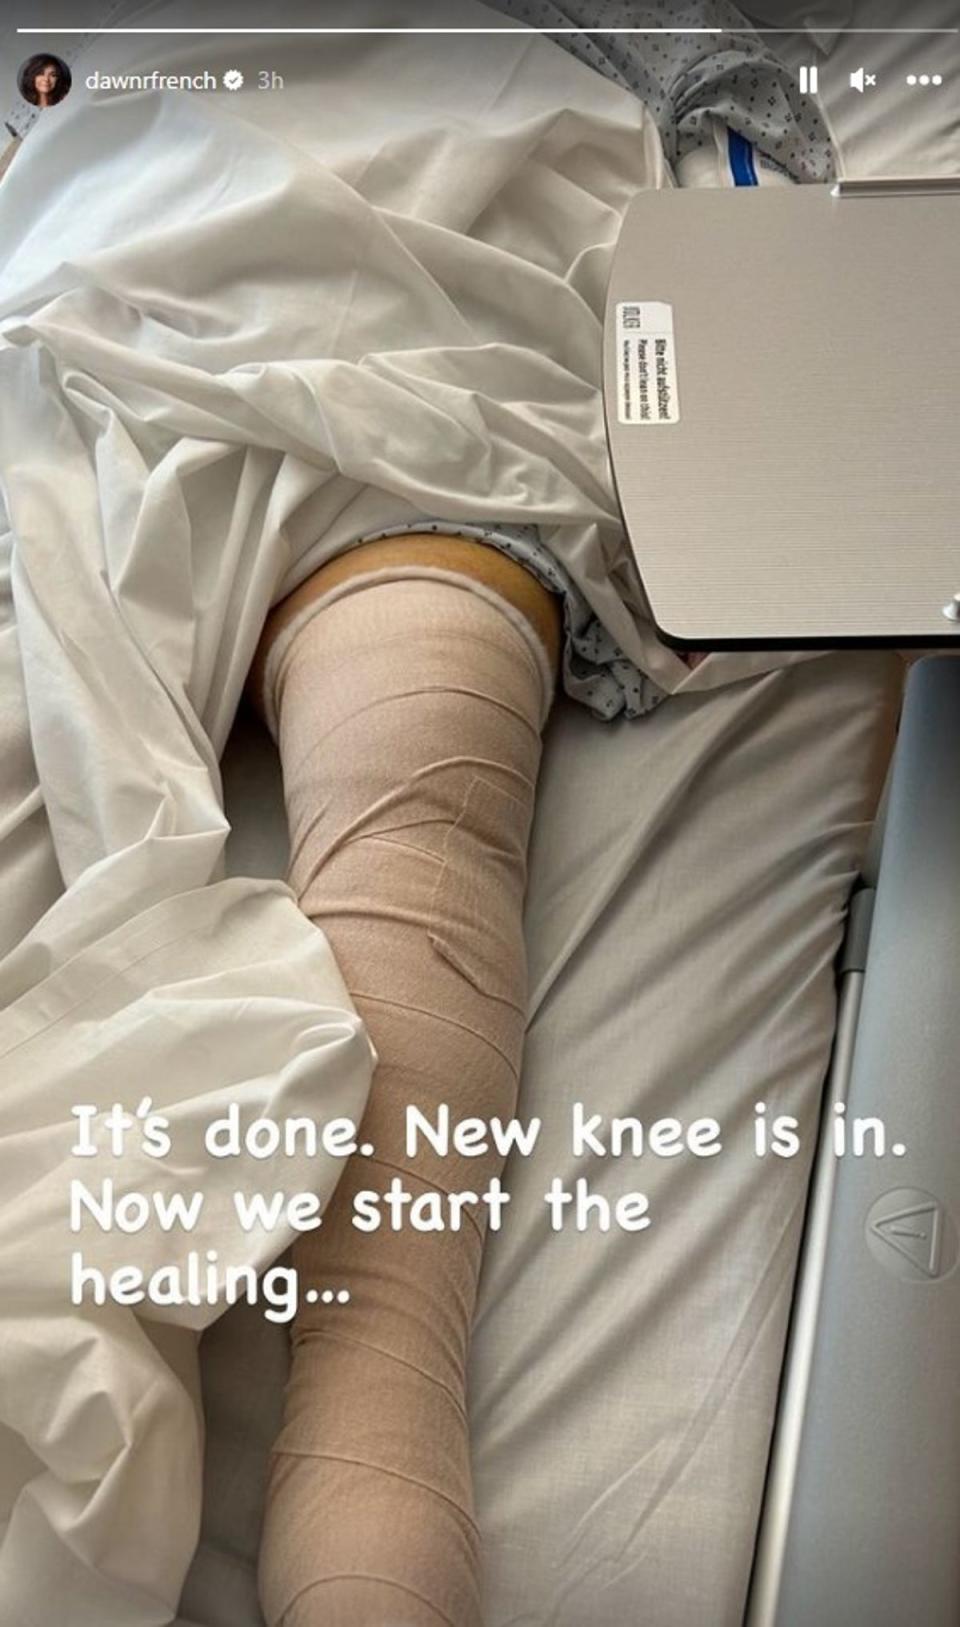 French shared a photo of her bandage leg on her Instagram Story (Instagram/Dawn French)